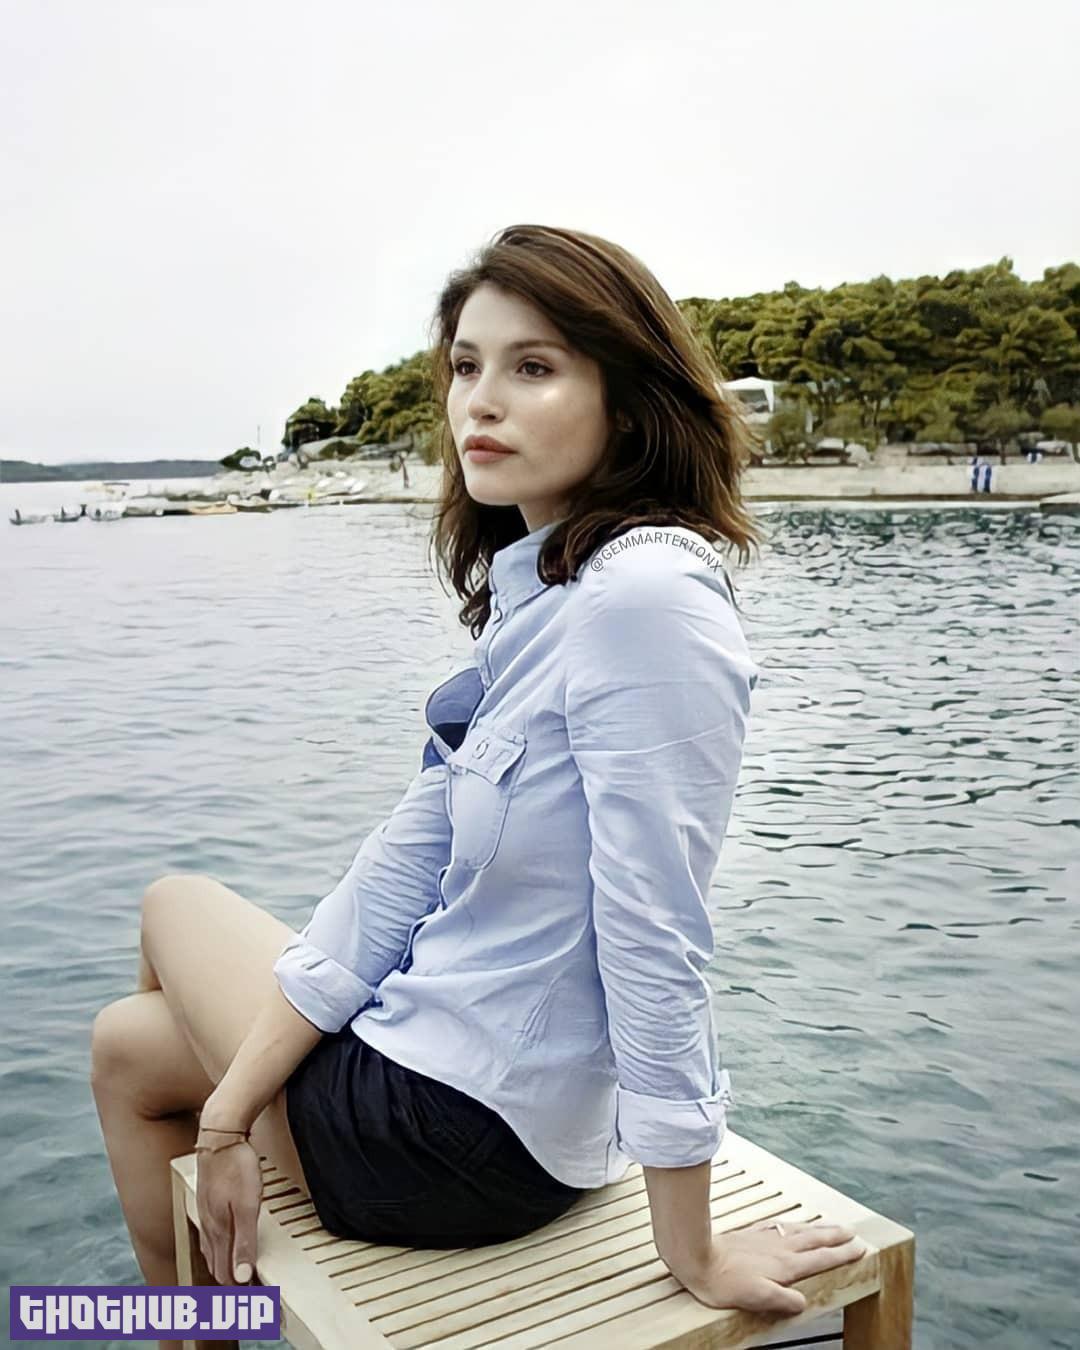 1695521898 899 Gemma Arterton Nude Leaked Video And New Photos